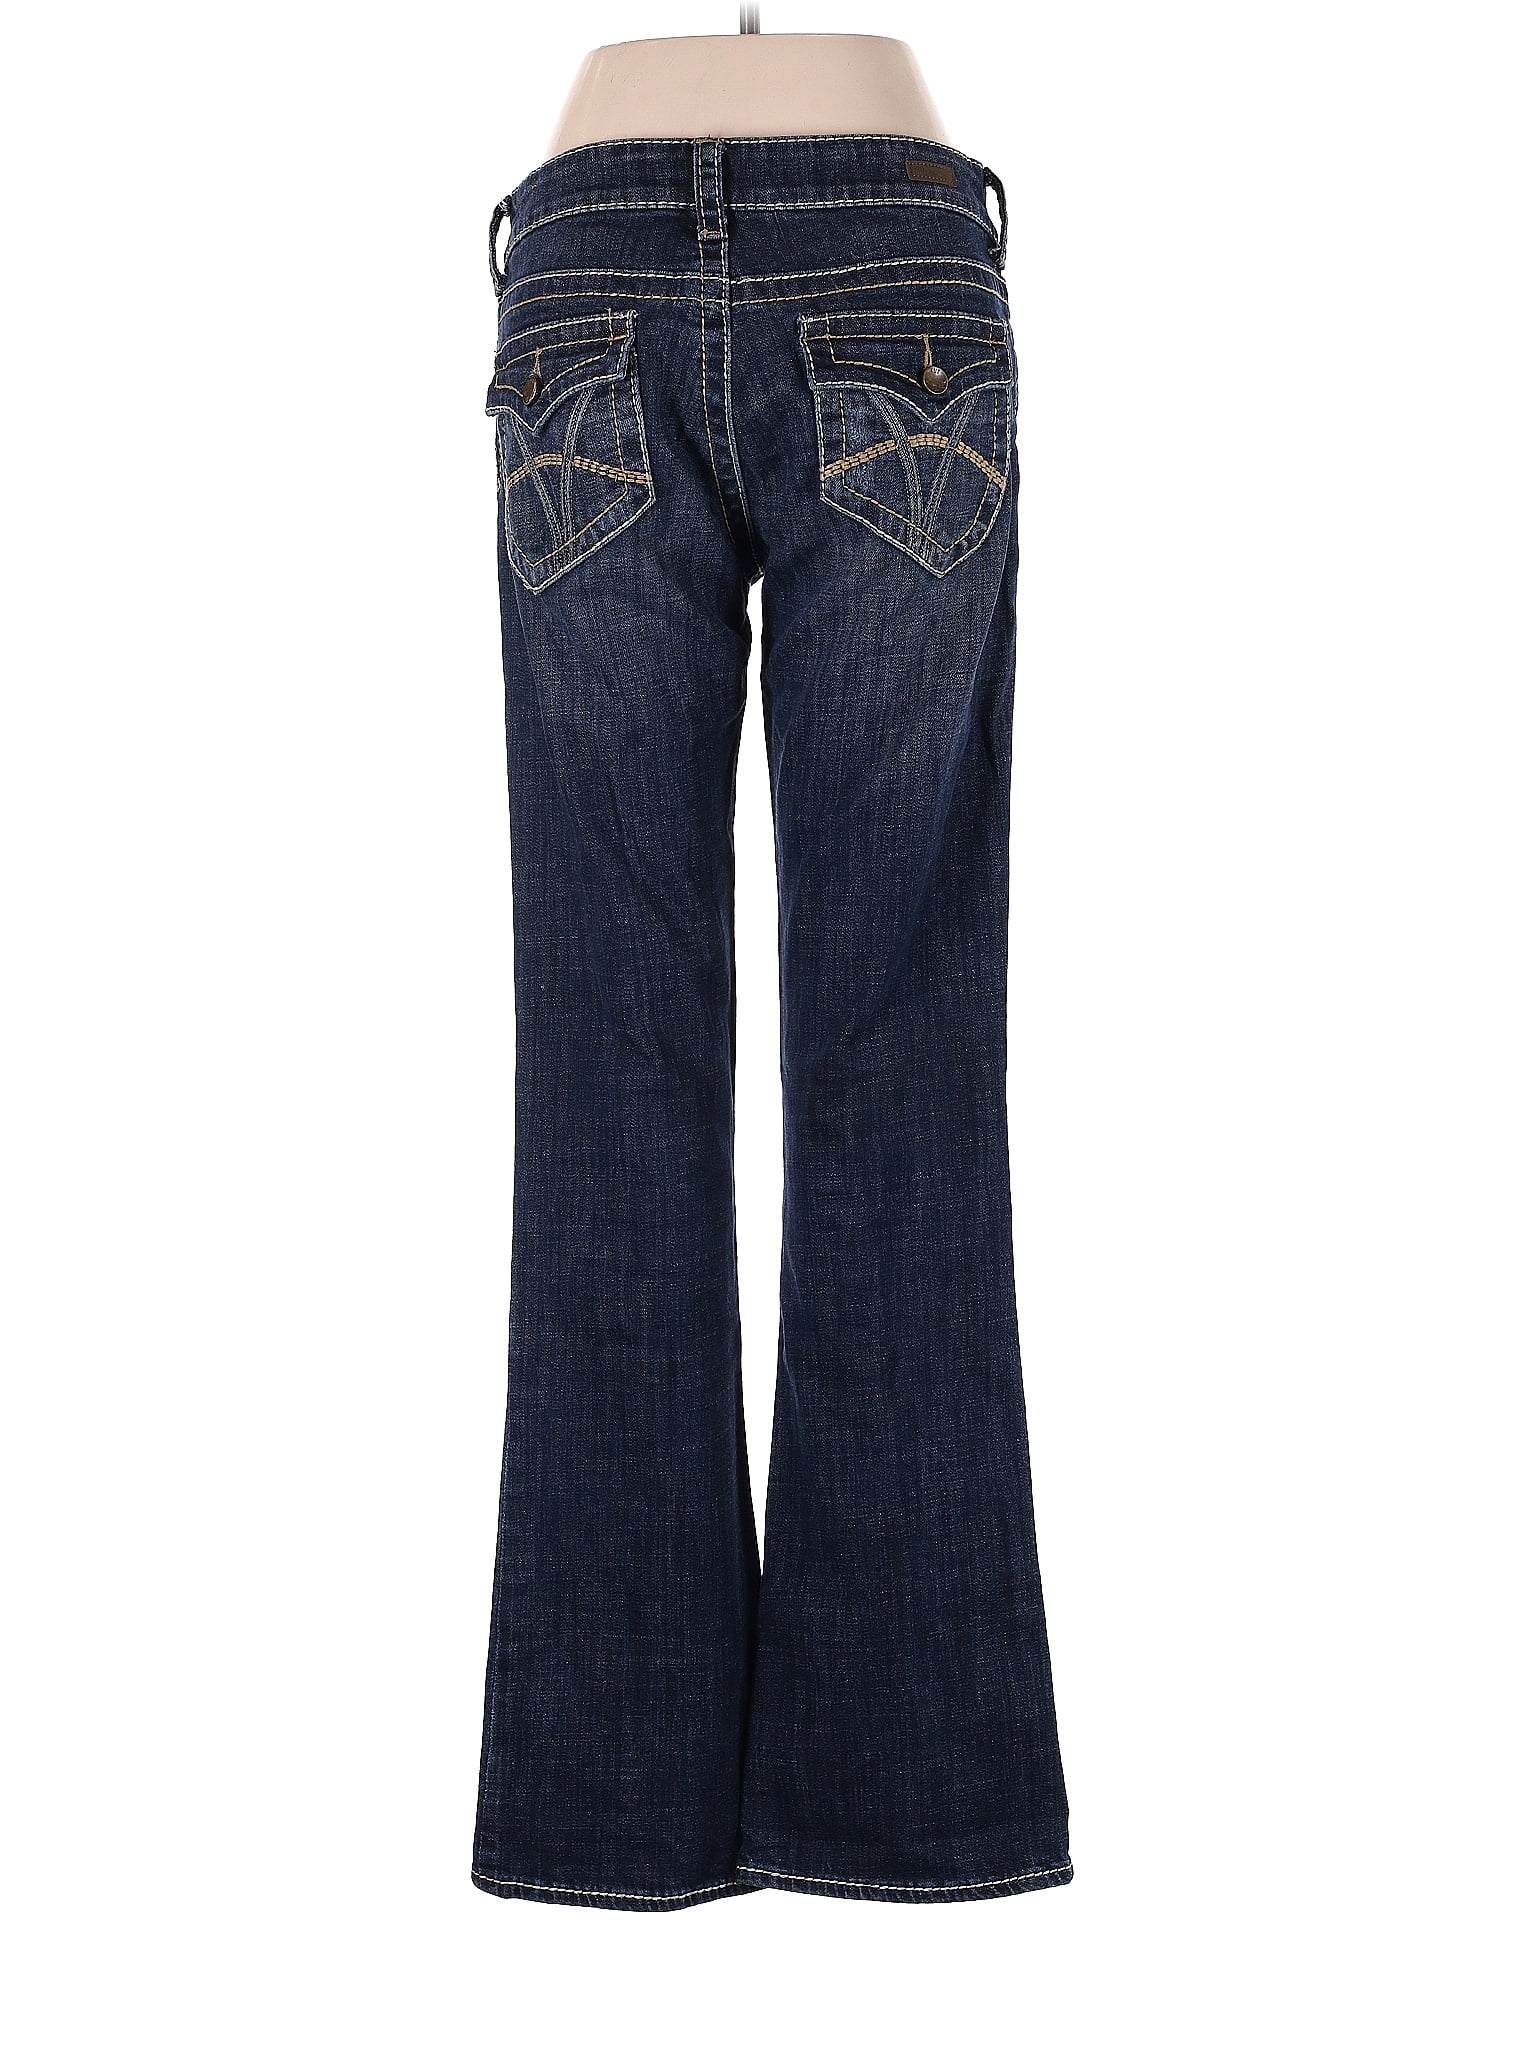 LC Lauren Conrad Women's Flare Jeans On Sale Up To 90% Off Retail